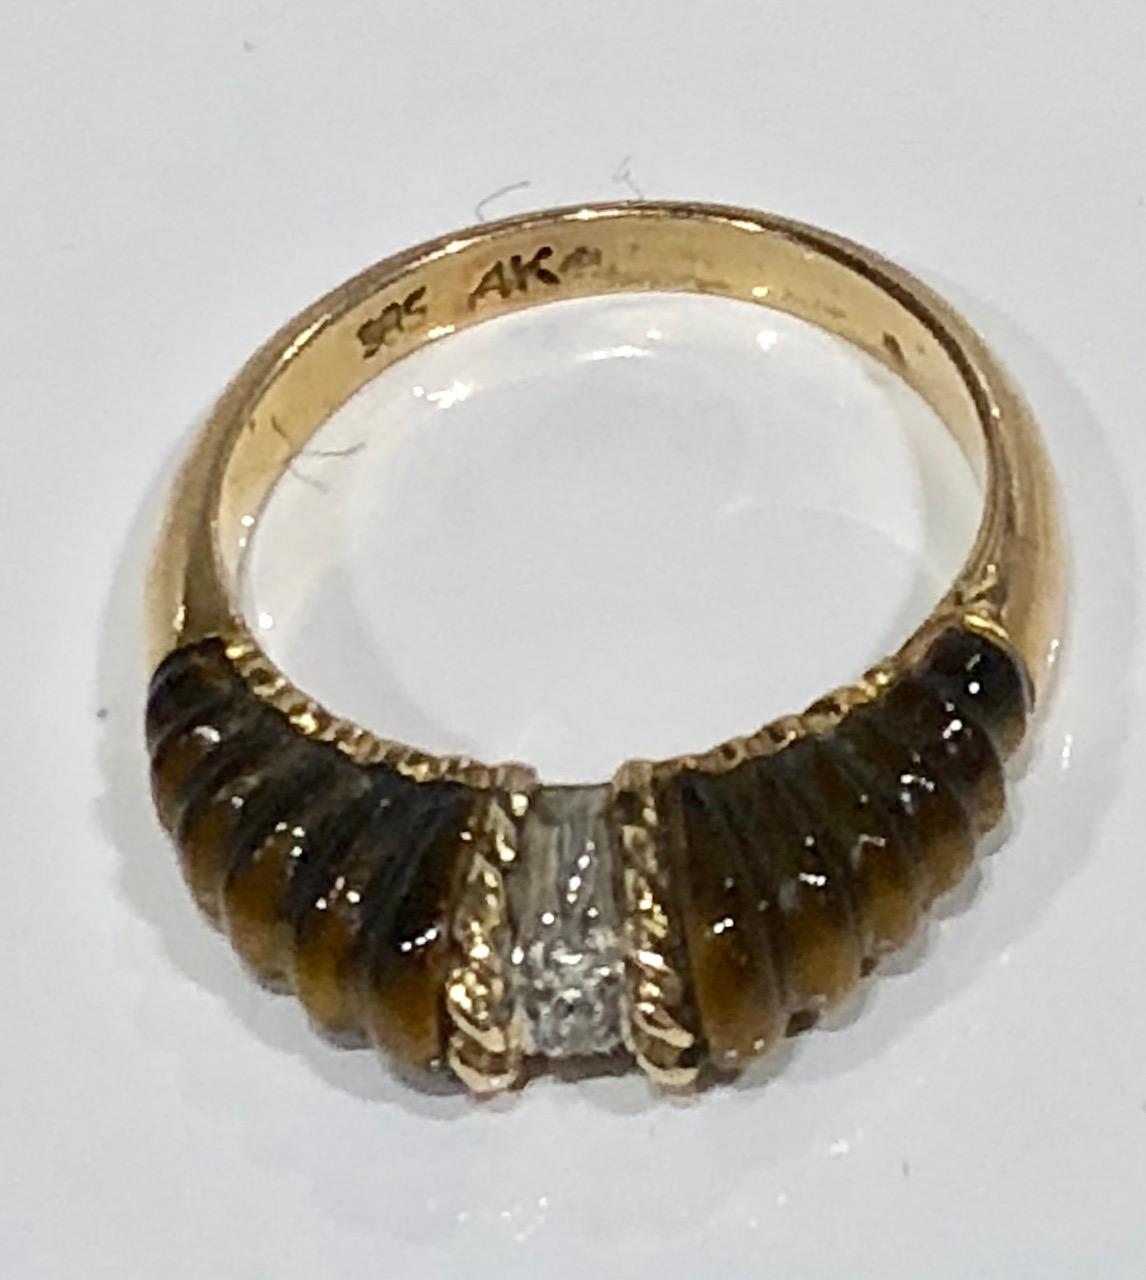 Carved Tigers Eye with diamond inset ring in 14k gold. Ca 1970's
Stamped. Size 7 US